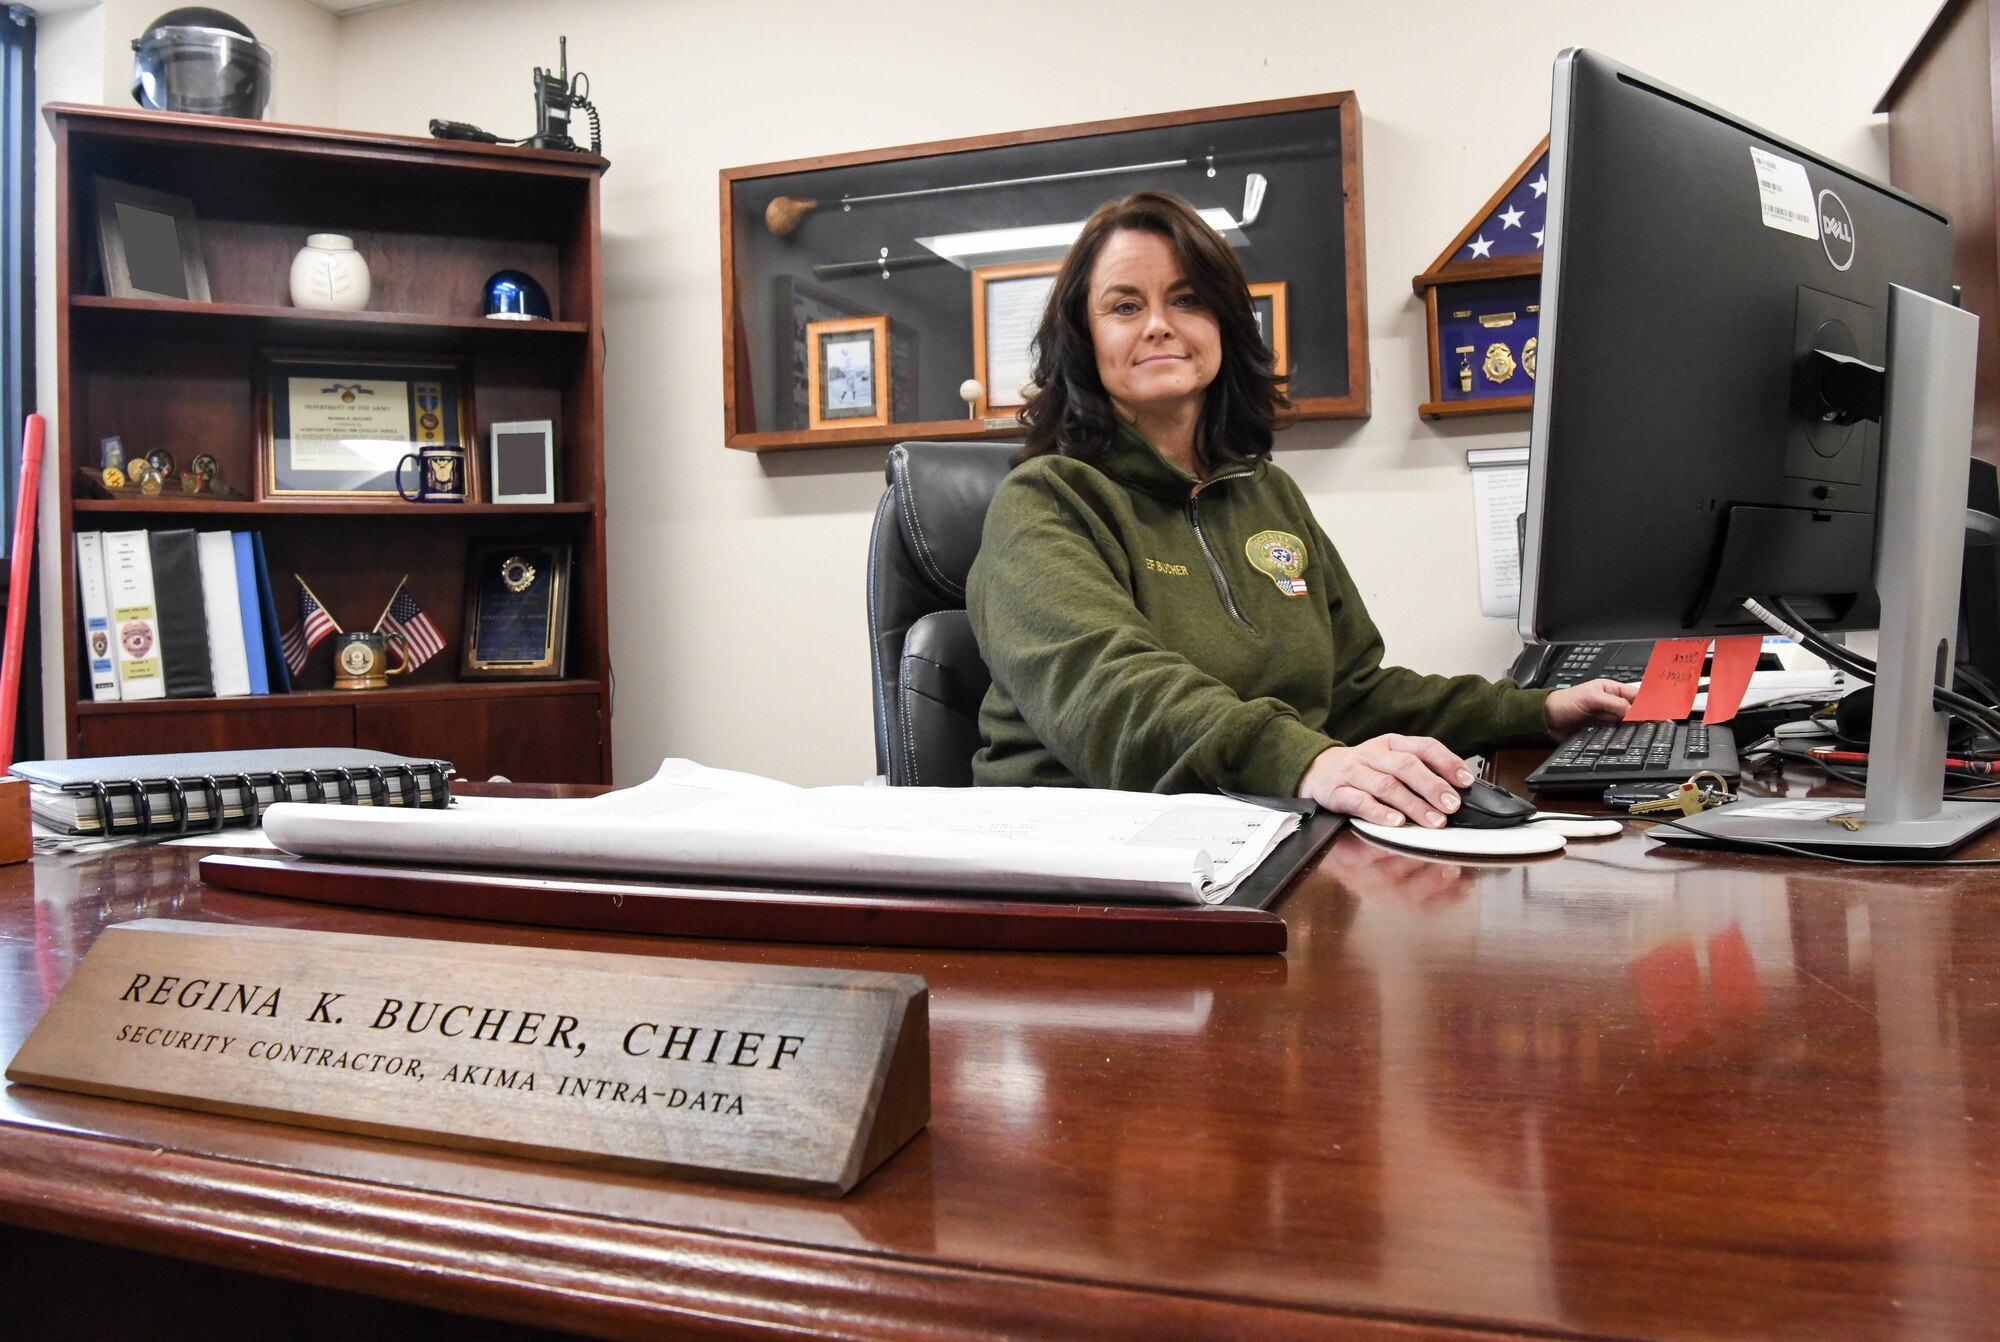 Regina Bucher, the new the new Security Services Supervisor at Arnold Air Force Base, Tenn., sits at her desk Dec. 8, 2020. She is the first female to lead the contractor security section. (U.S. Air Force photo by Jill Pickett) (This image was altered by obscuring photos in this image for security reasons.))